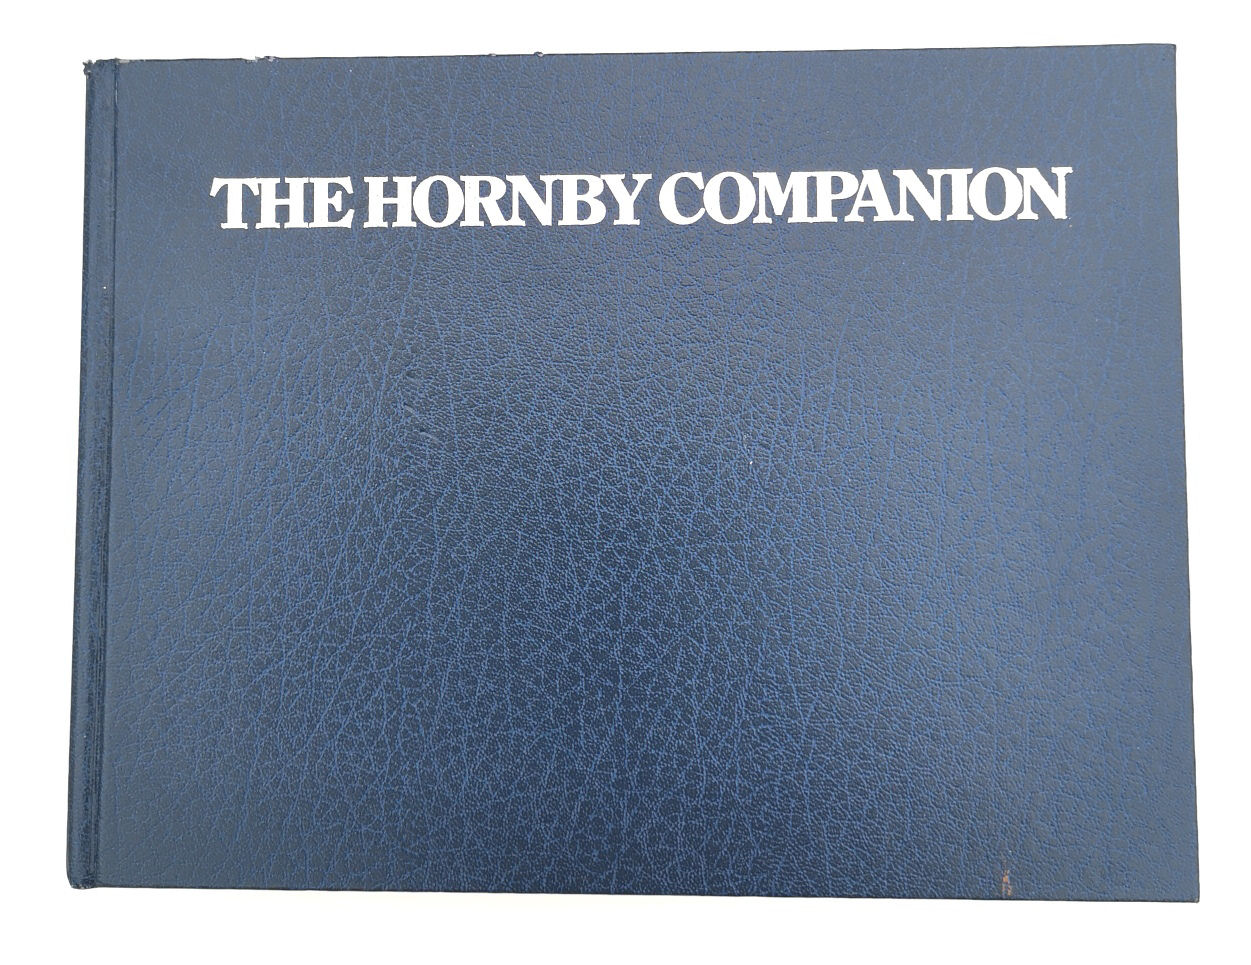 LOT 0091 - NEW CAVENDISH Vol 8. THE HORNBY COMPANION.